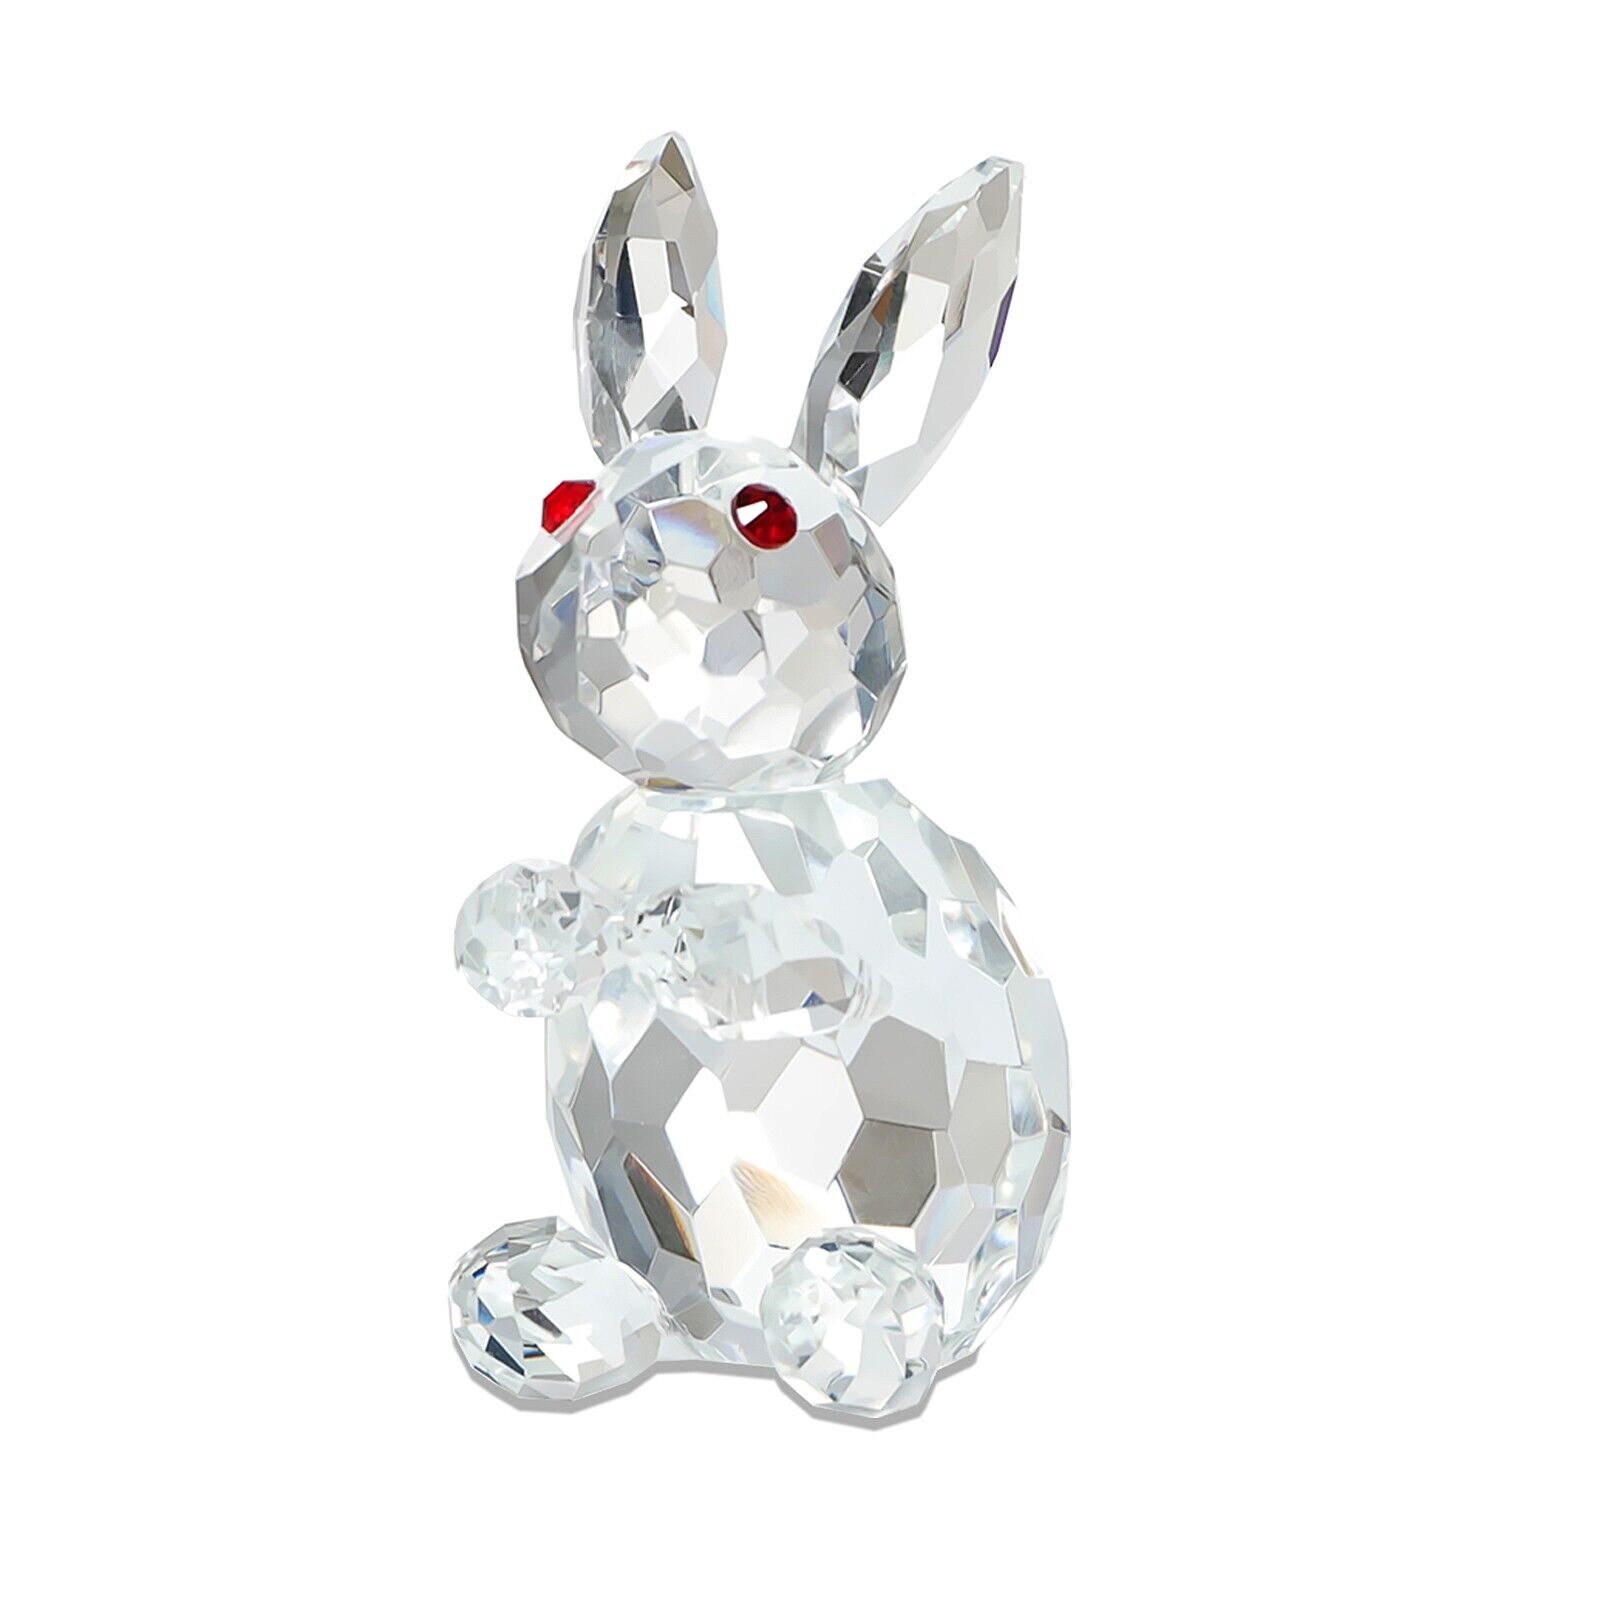 Crystal Figurines Bunny Paperweight Home Bookshelf Decor Easter Rabbit Gift